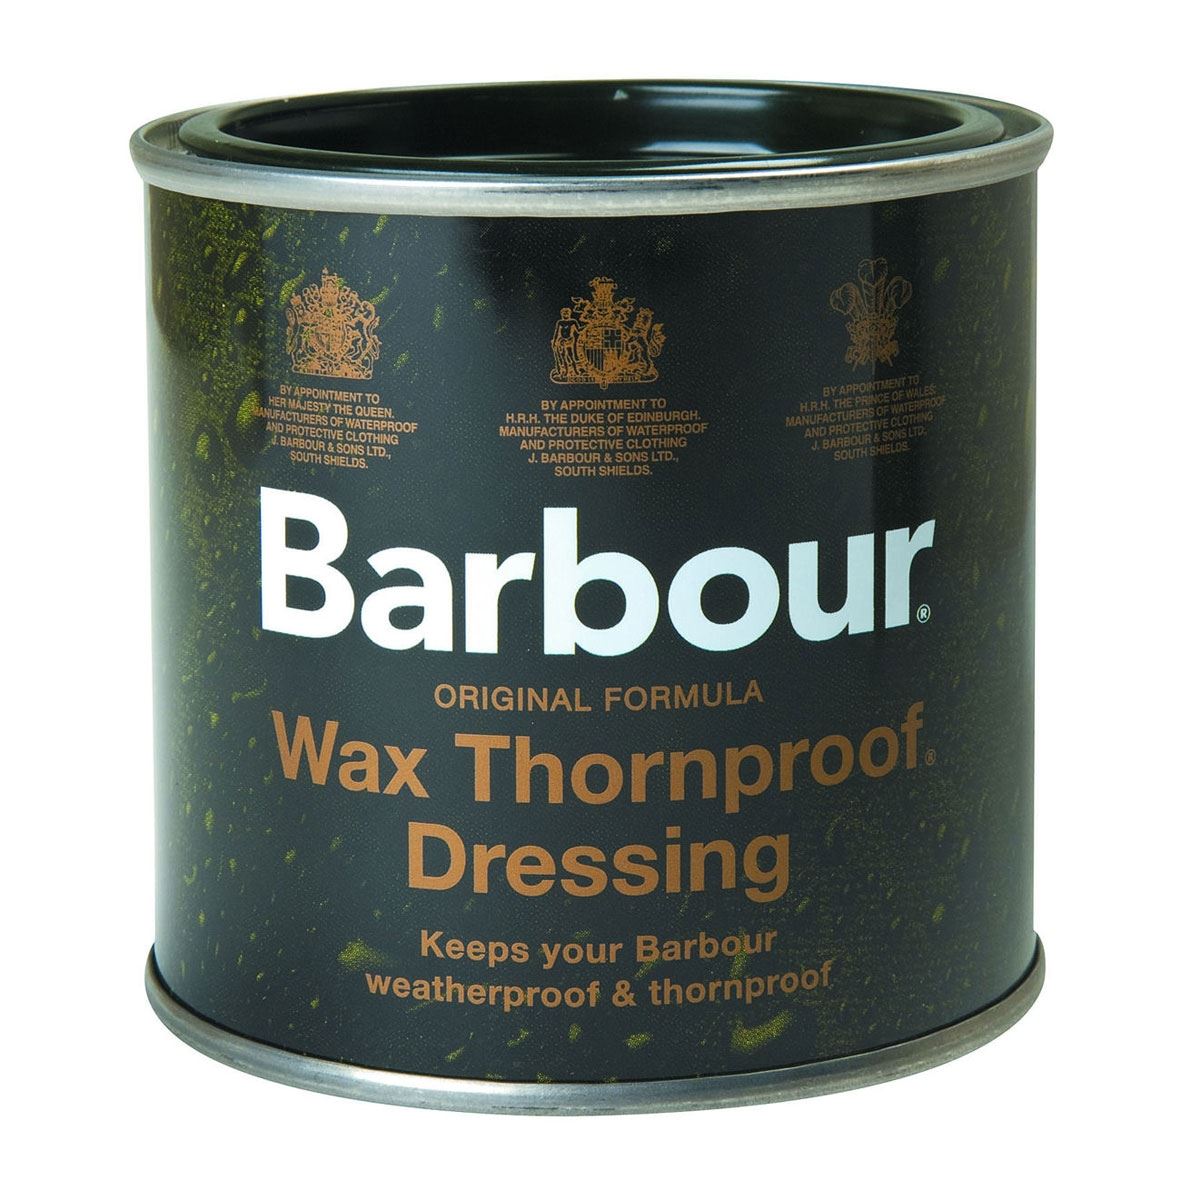 What is the size of a Barbour wax tin for Thornproof Dressing?